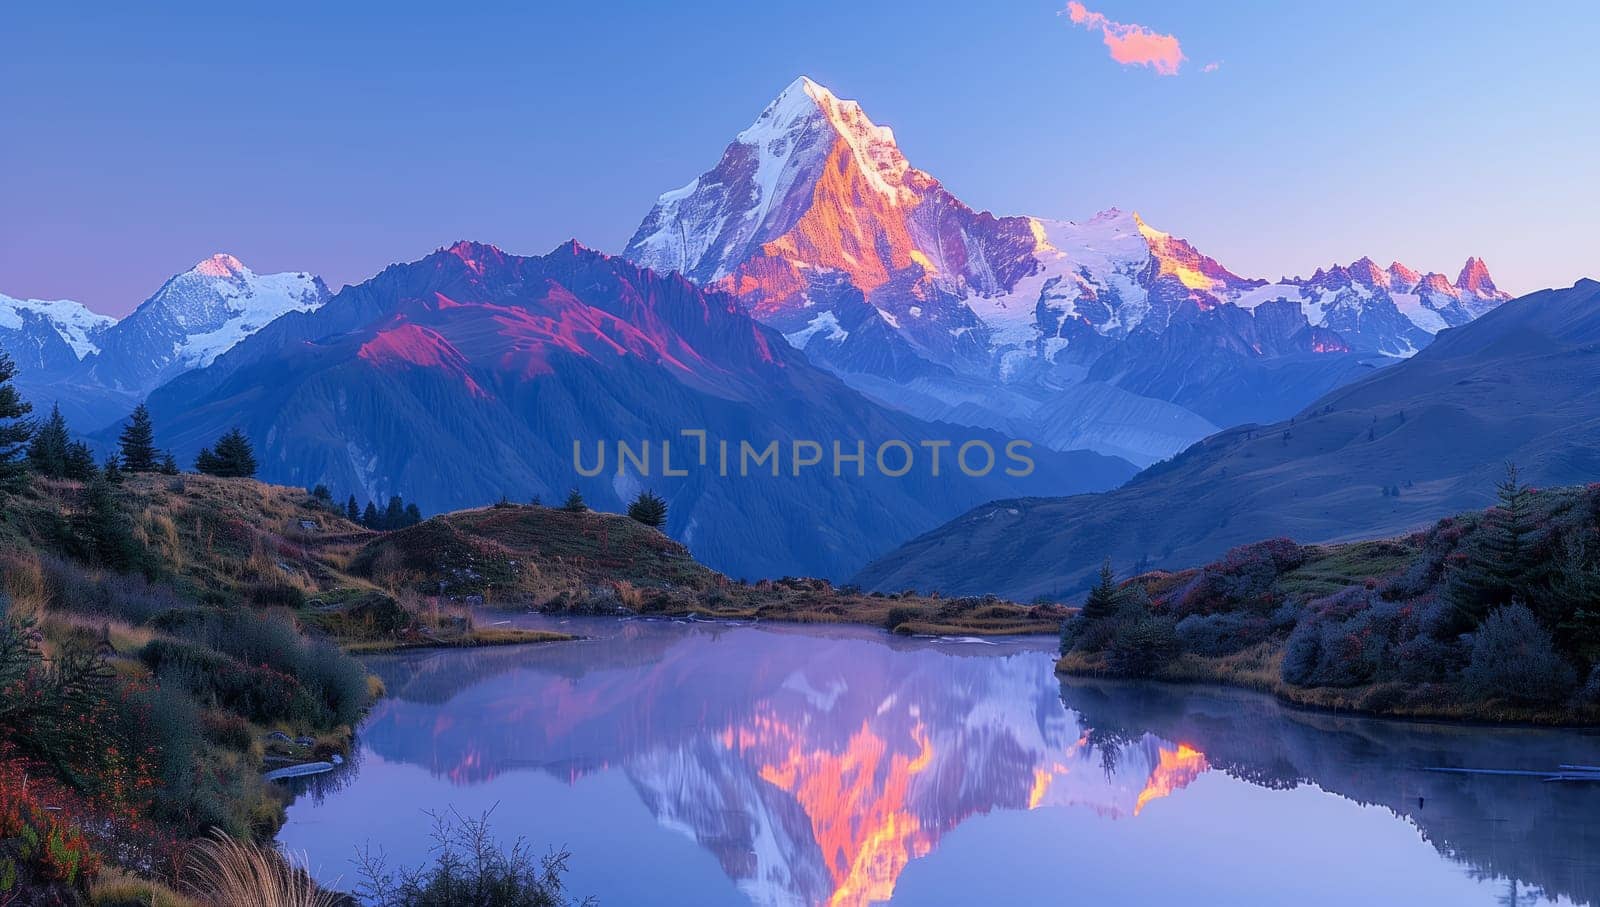 A stunning natural landscape unfolds as the mountain is mirrored in the tranquil lake under the colorful sky during sunset